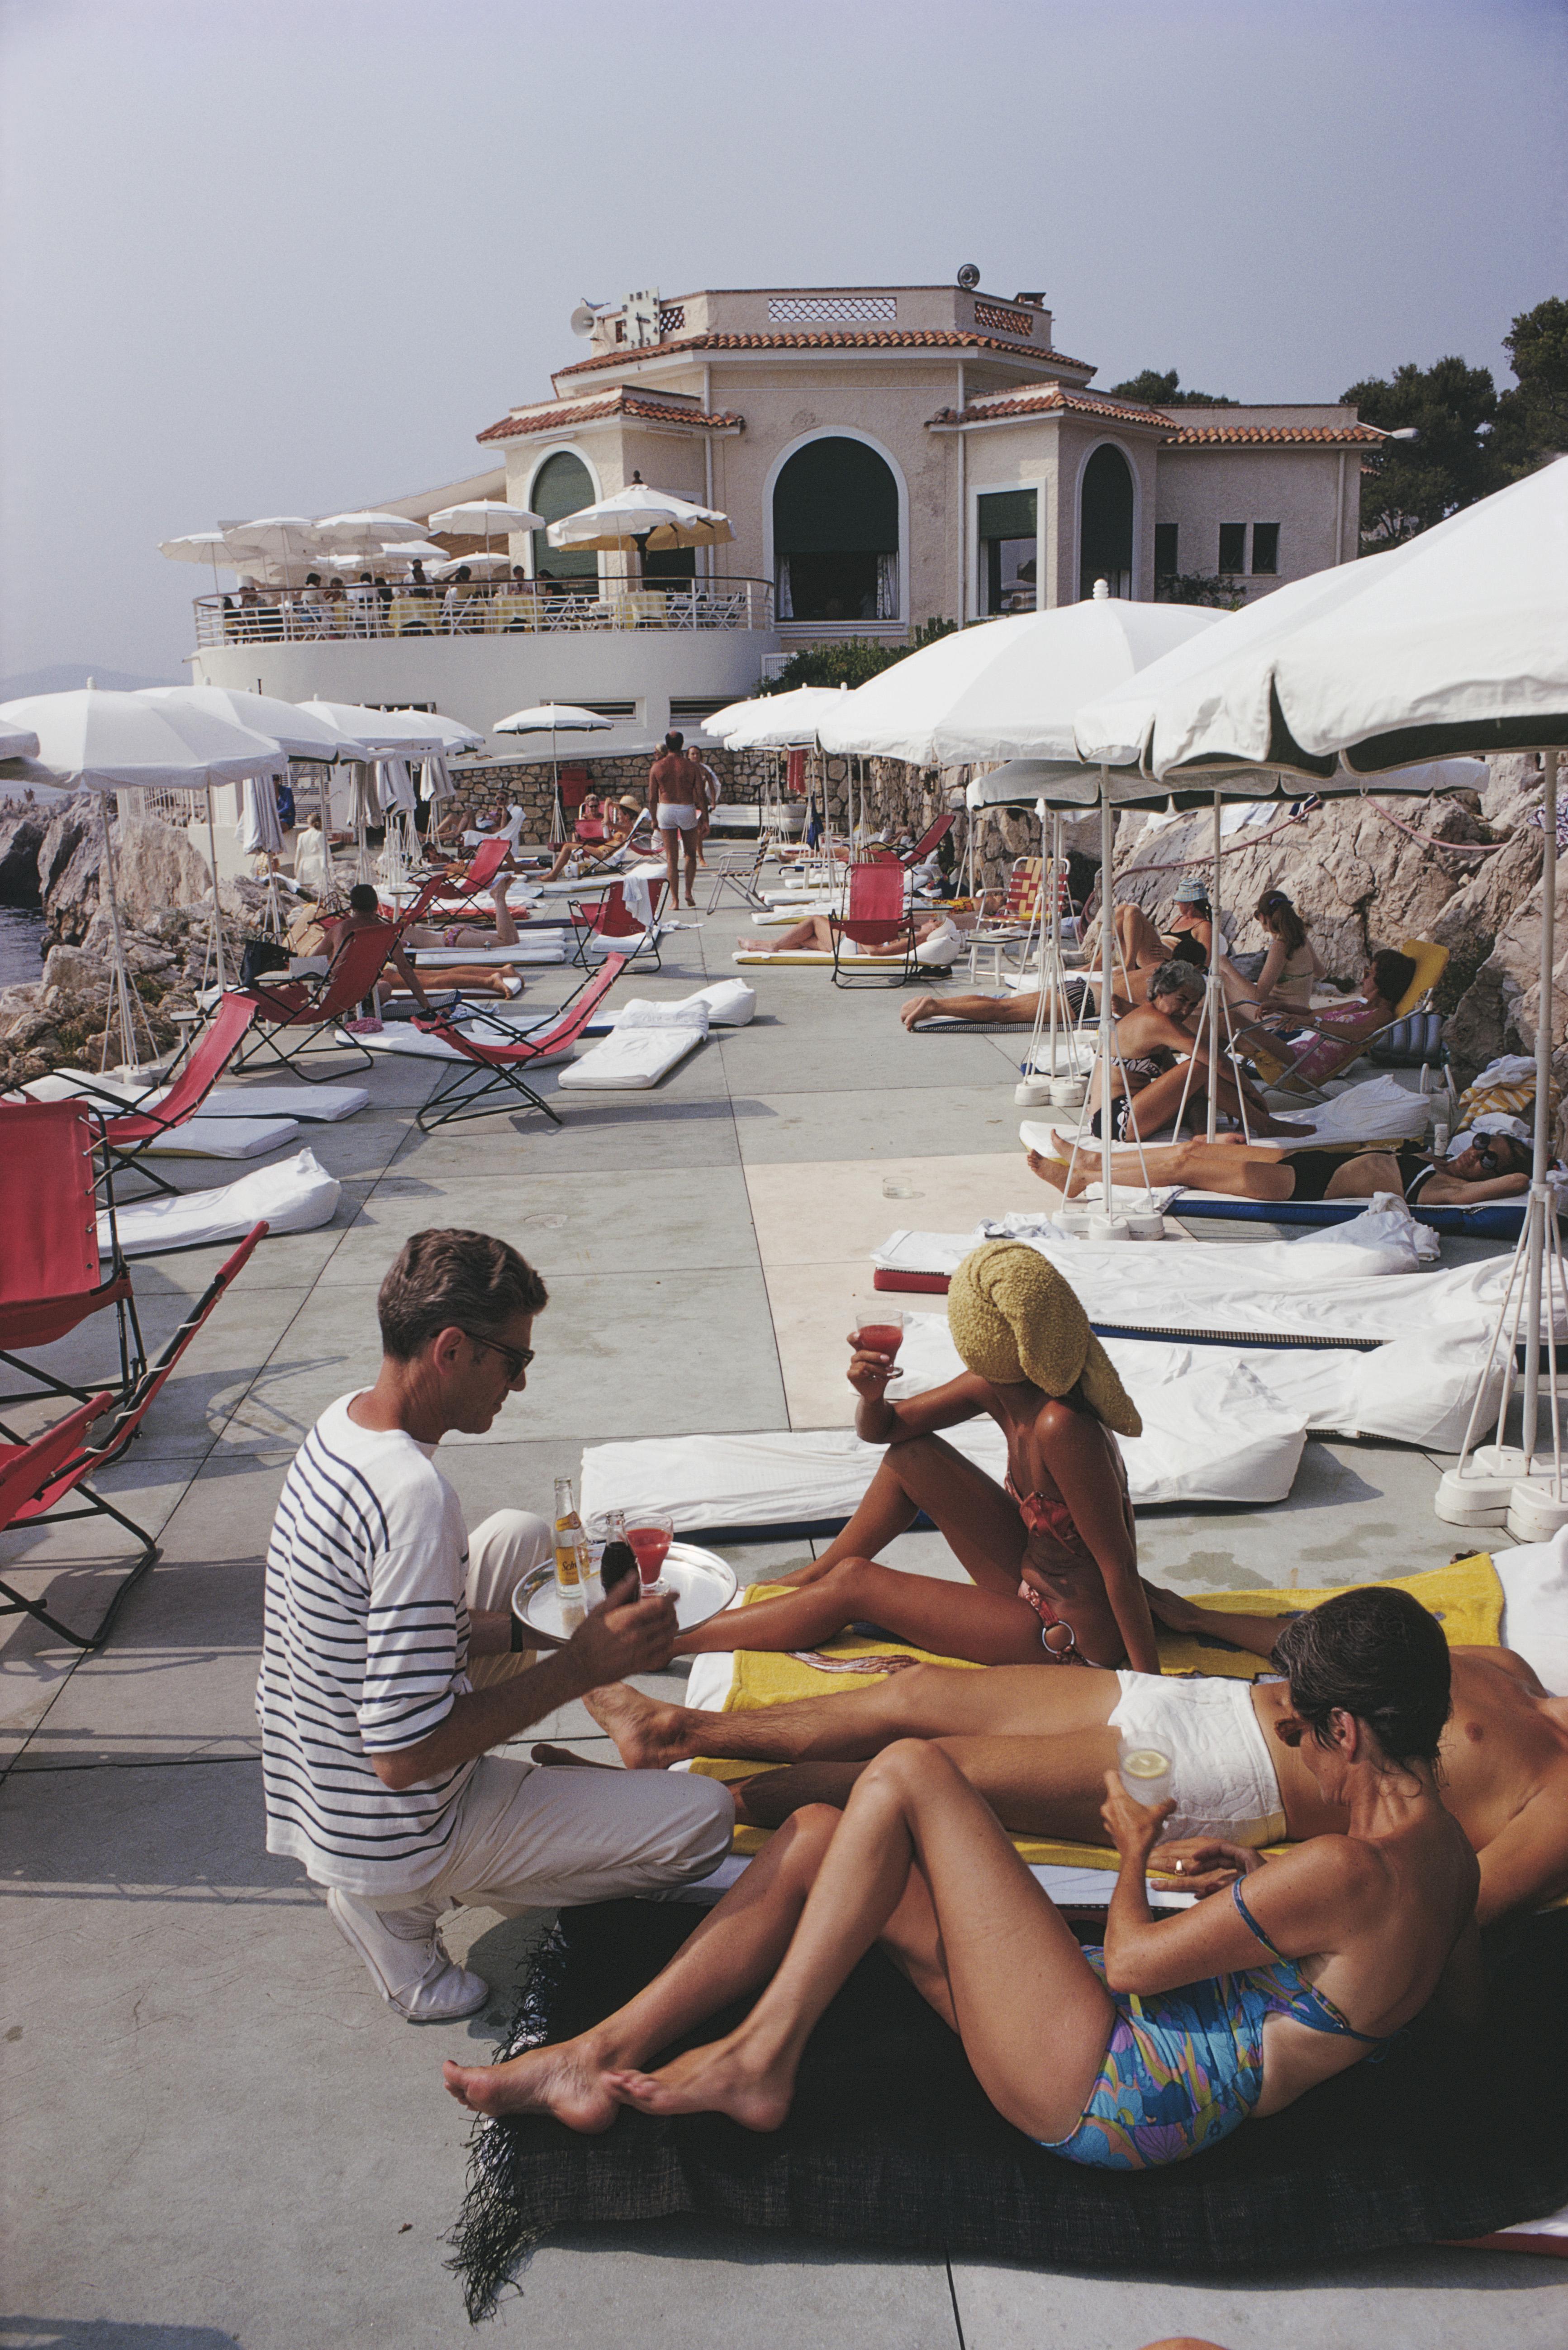 'Hotel Du Cap' 1969 Slim Aarons Limited Estate Edition Print 
Holidaymakers at the Hotel du Cap Eden-Roc, Antibes on the French Riviera, 1969. 

Slim Aarons Chromogenic C print 
Printed Later 
Slim Aarons Estate Edition 
Produced utilising the only